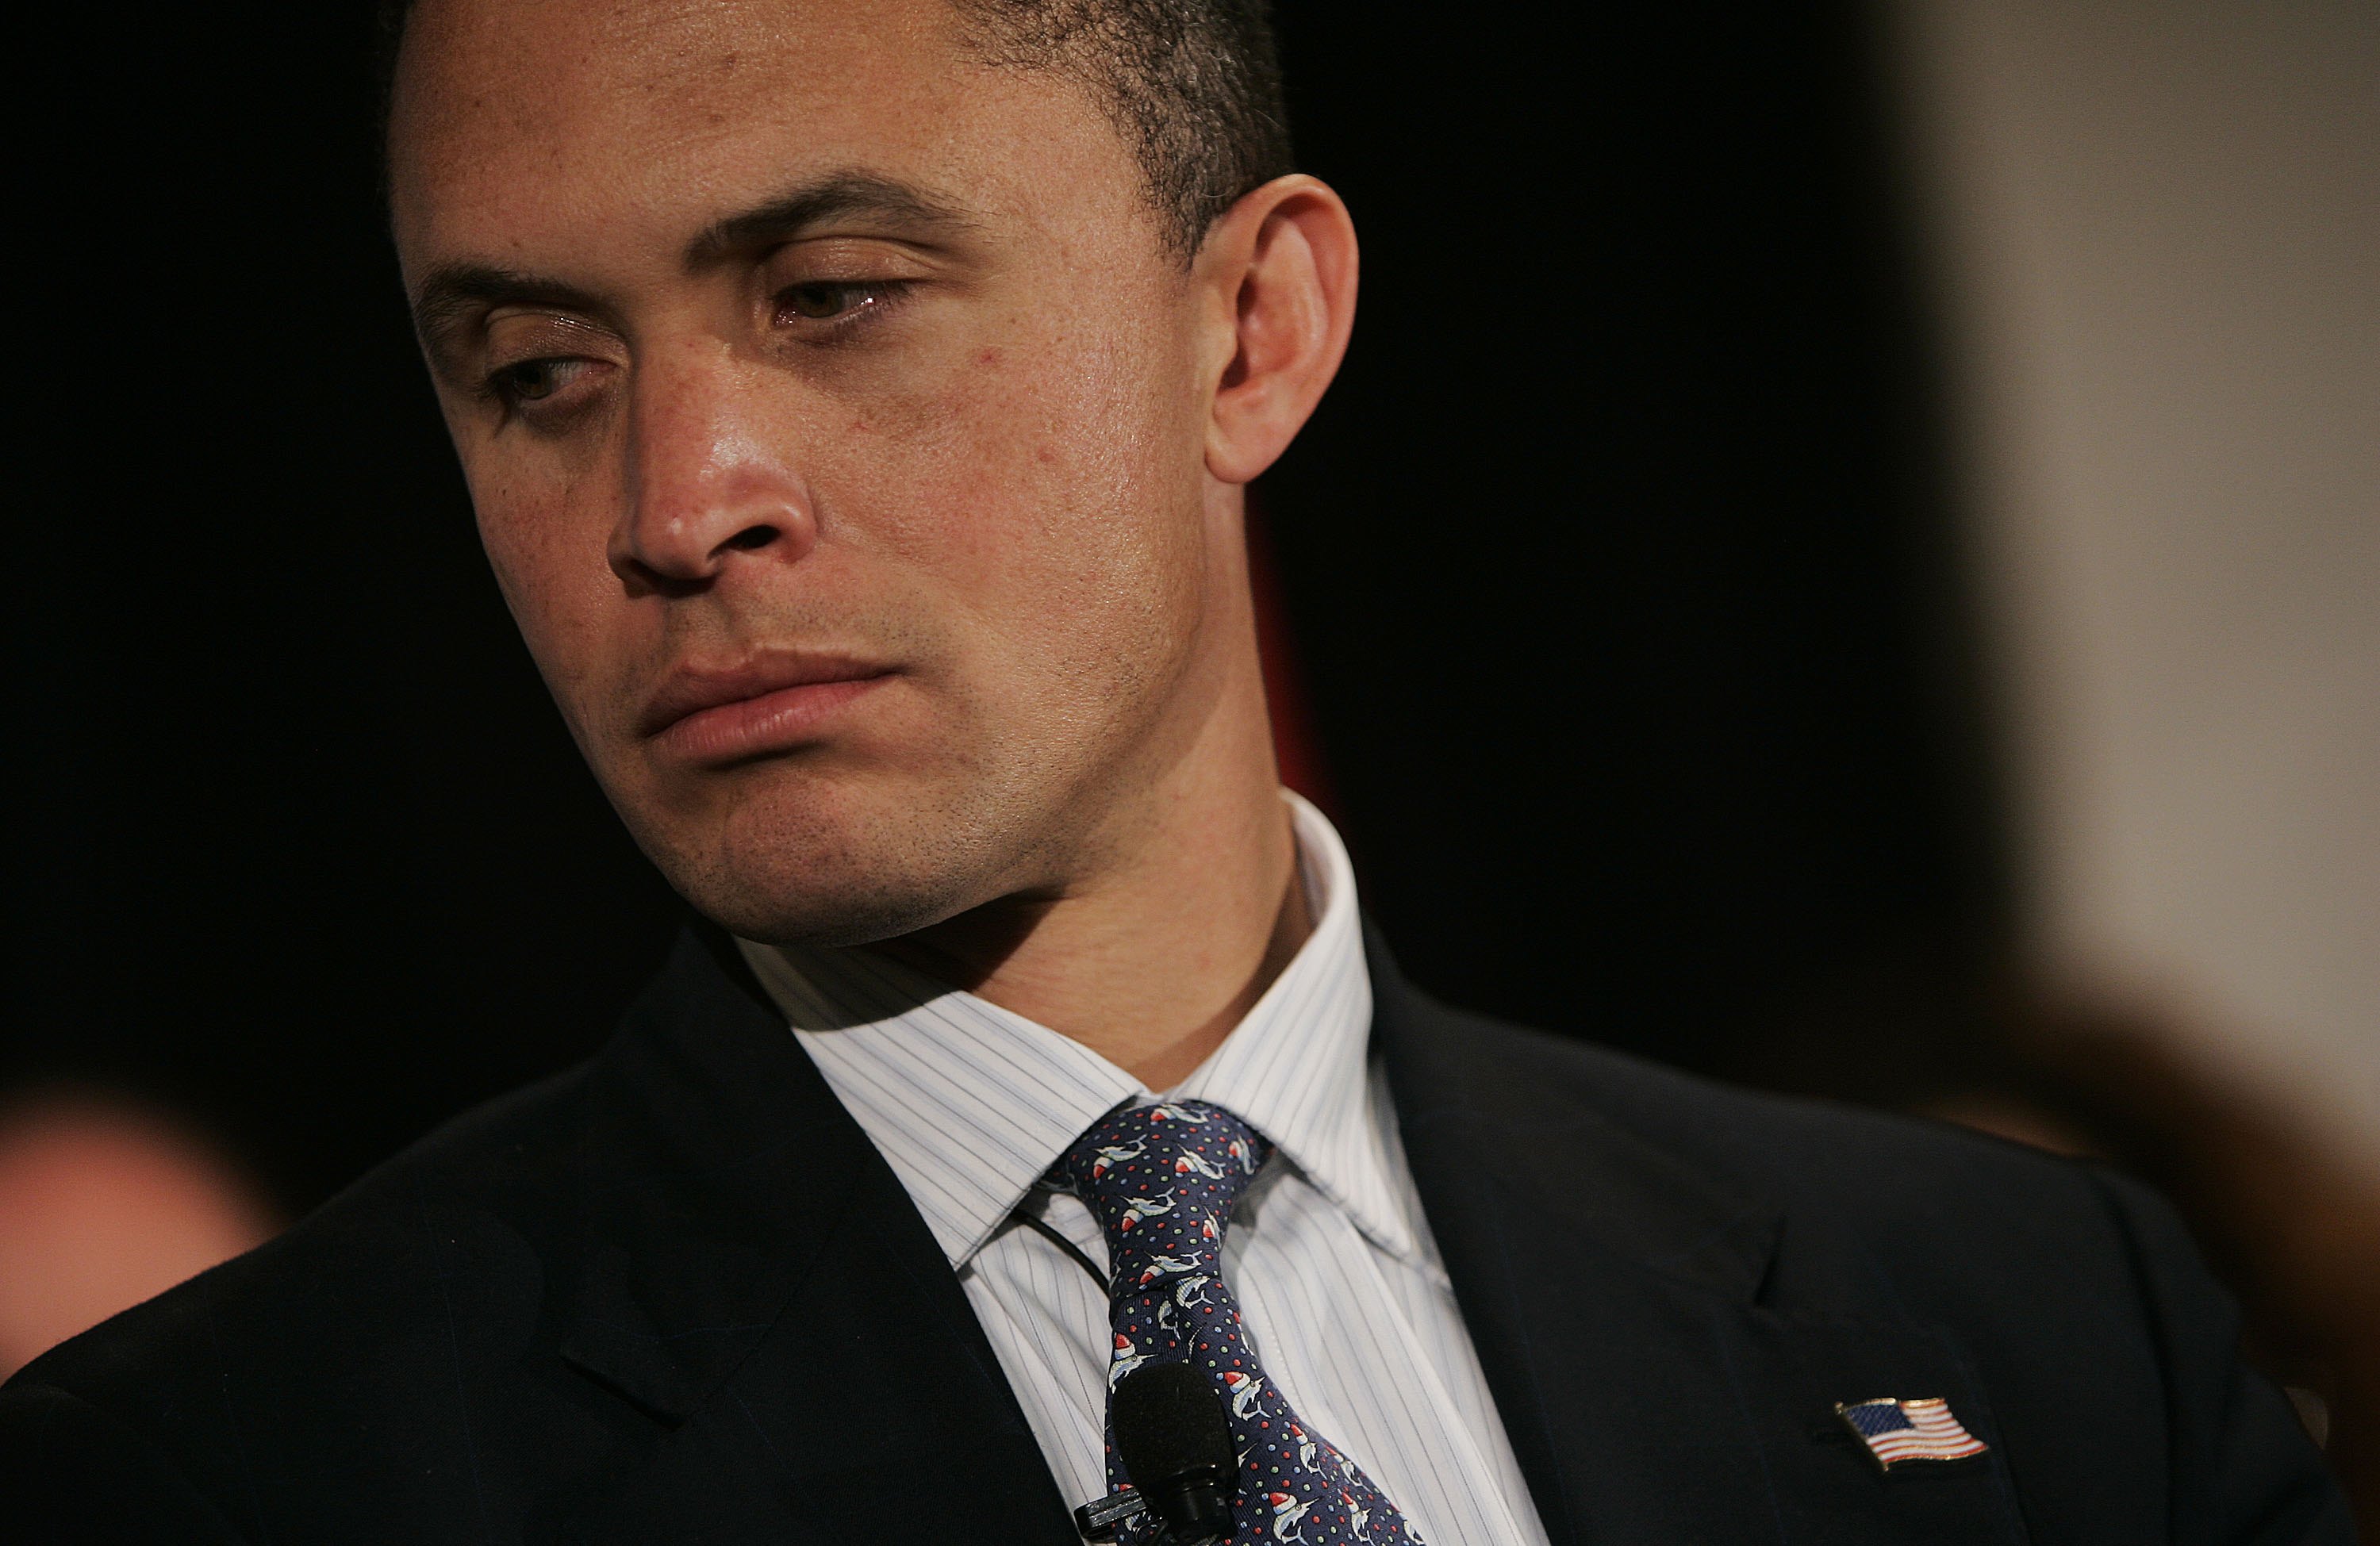 Harold Ford Jr.'s Downfall Was 'Years in the Making' InsideHook